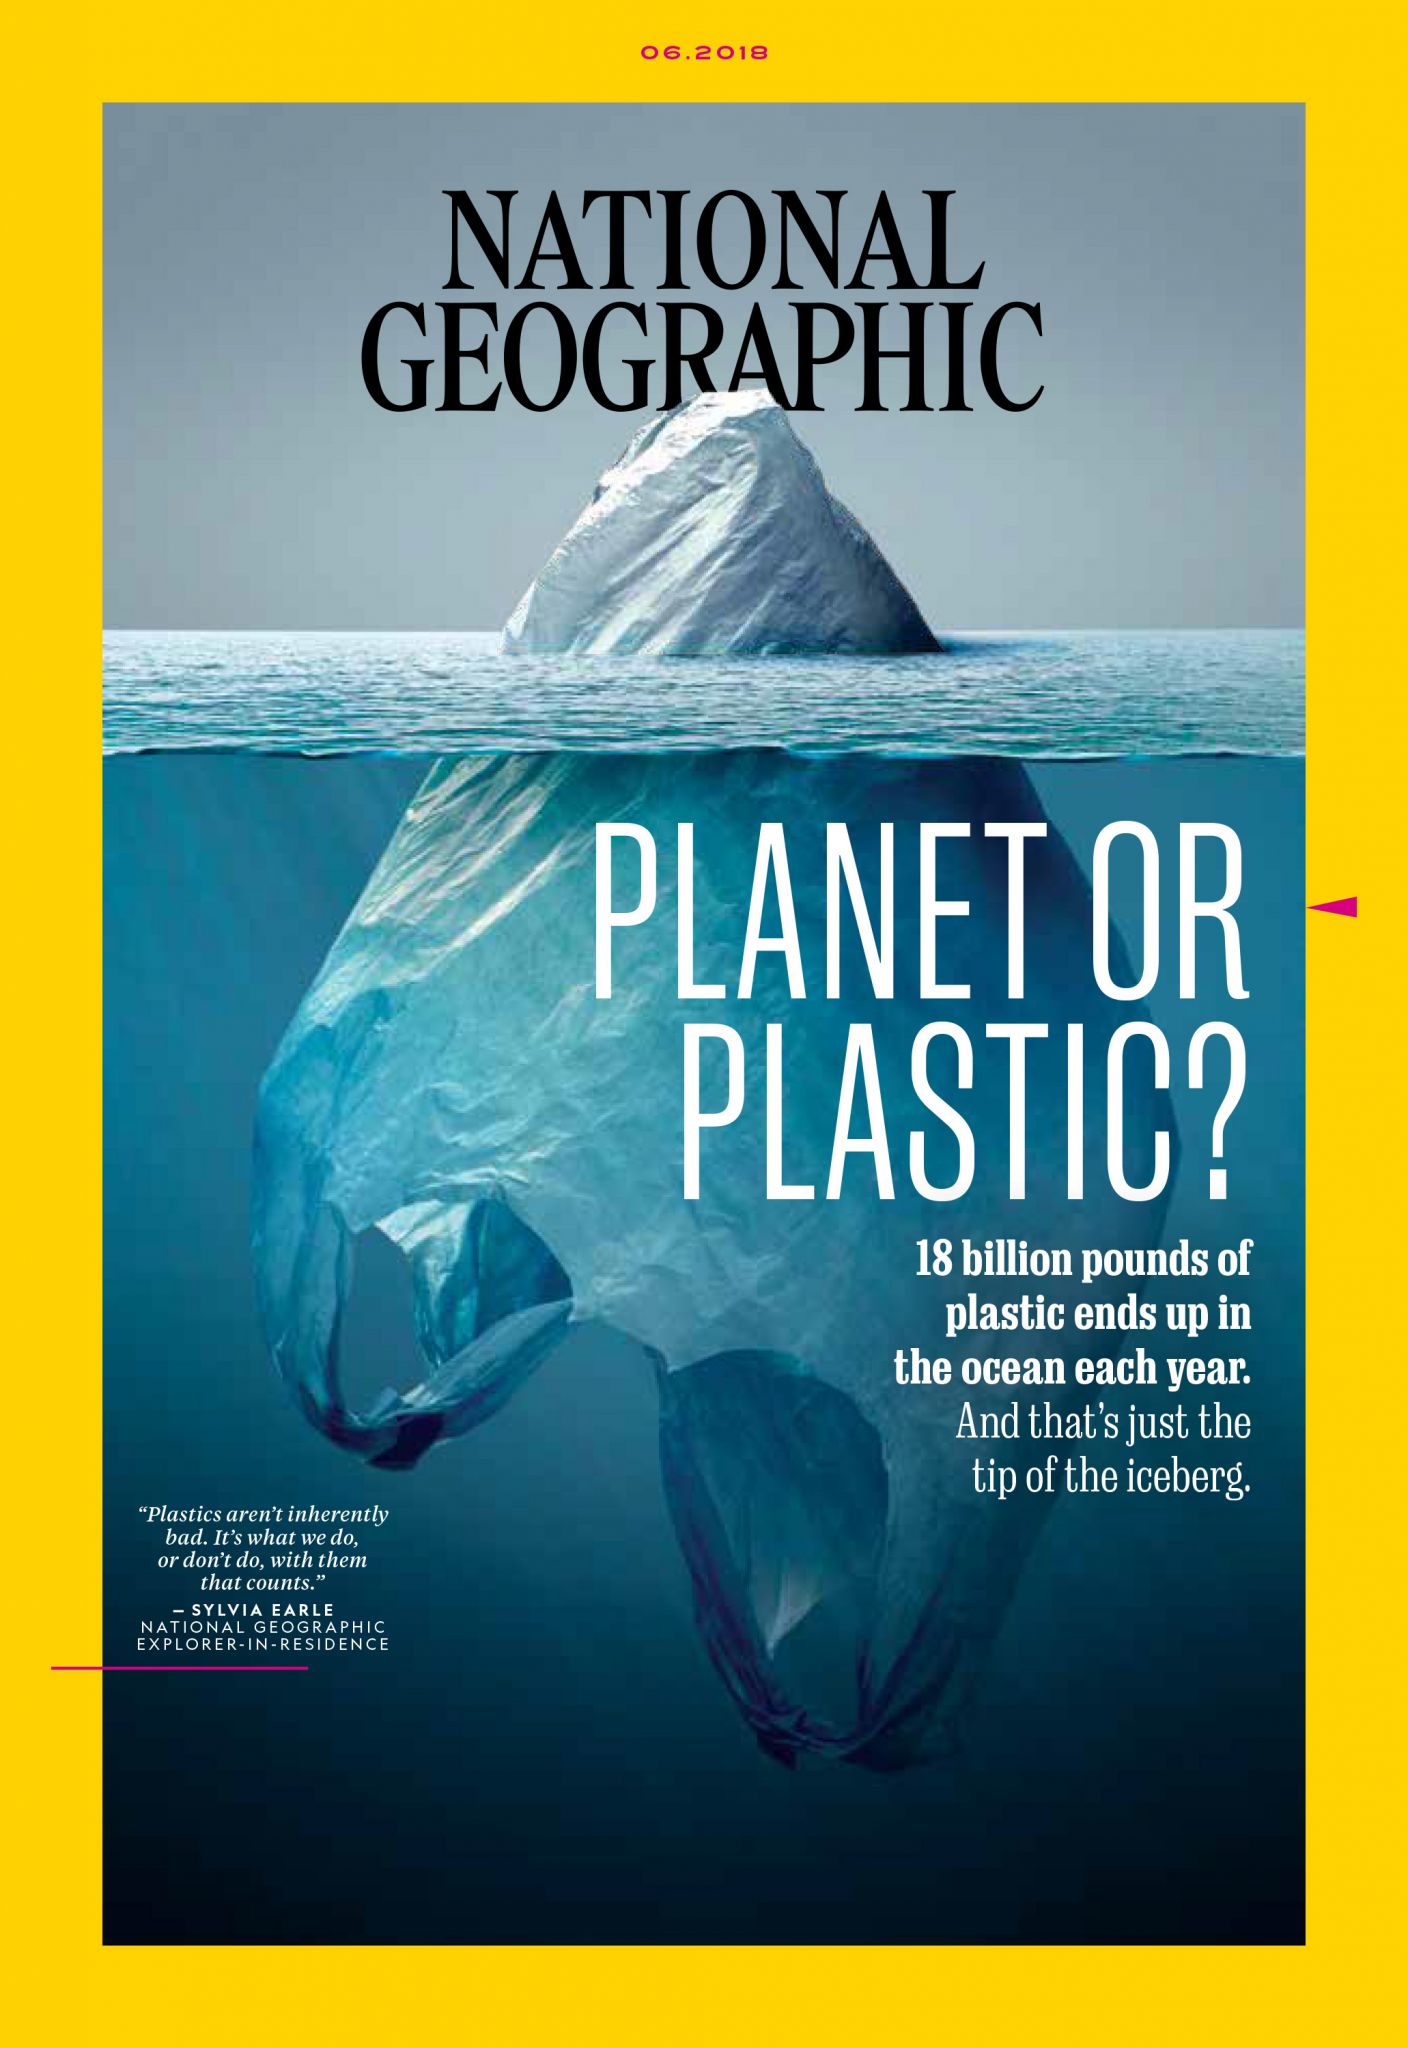 National Geographic's June magazine cover has people talking